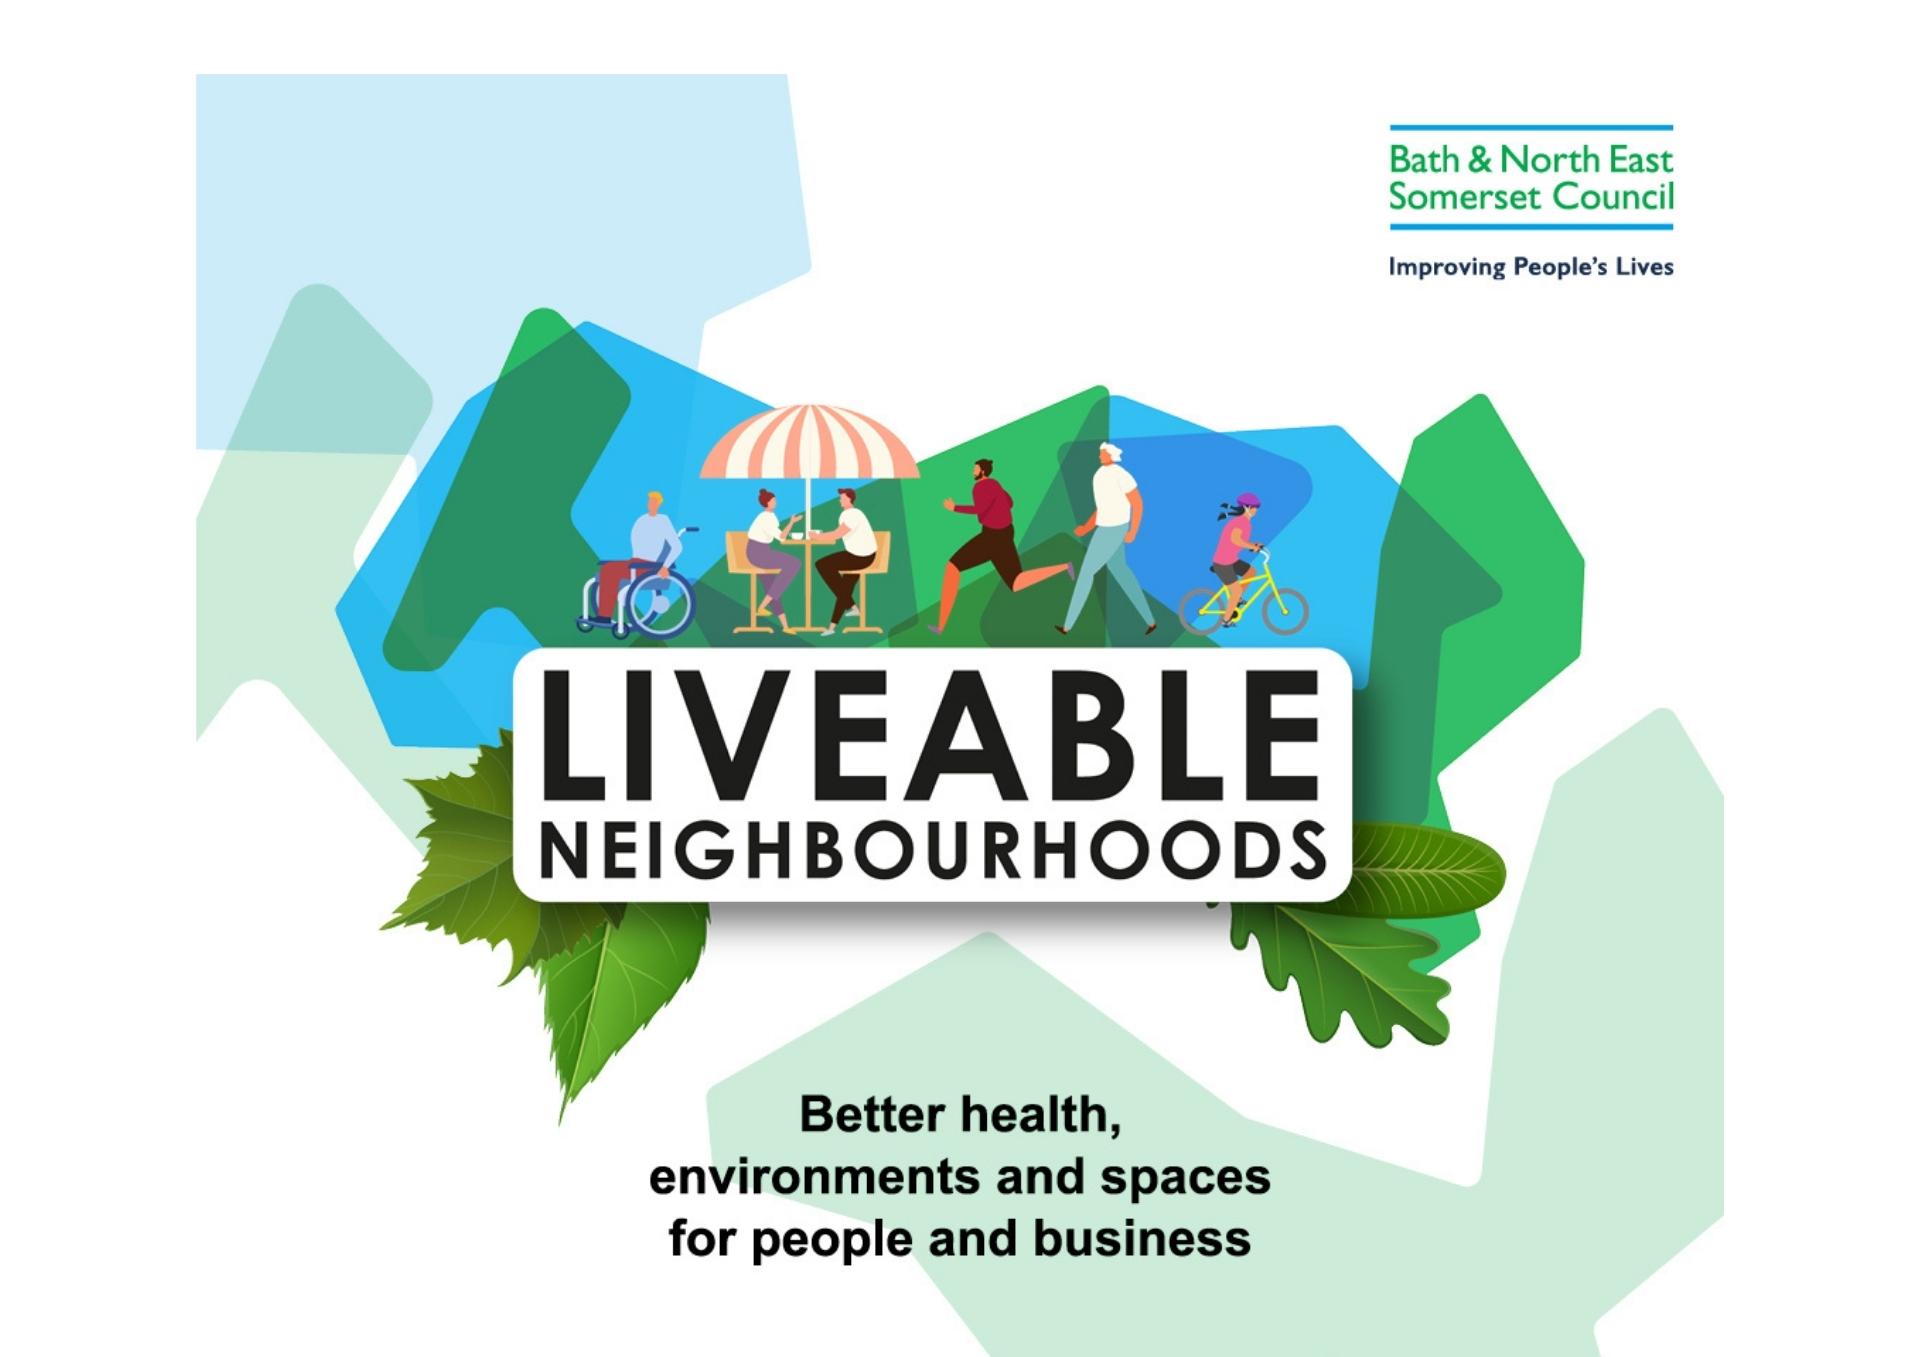 Next phase of consultation for Bath’s Liveable Neighbourhoods